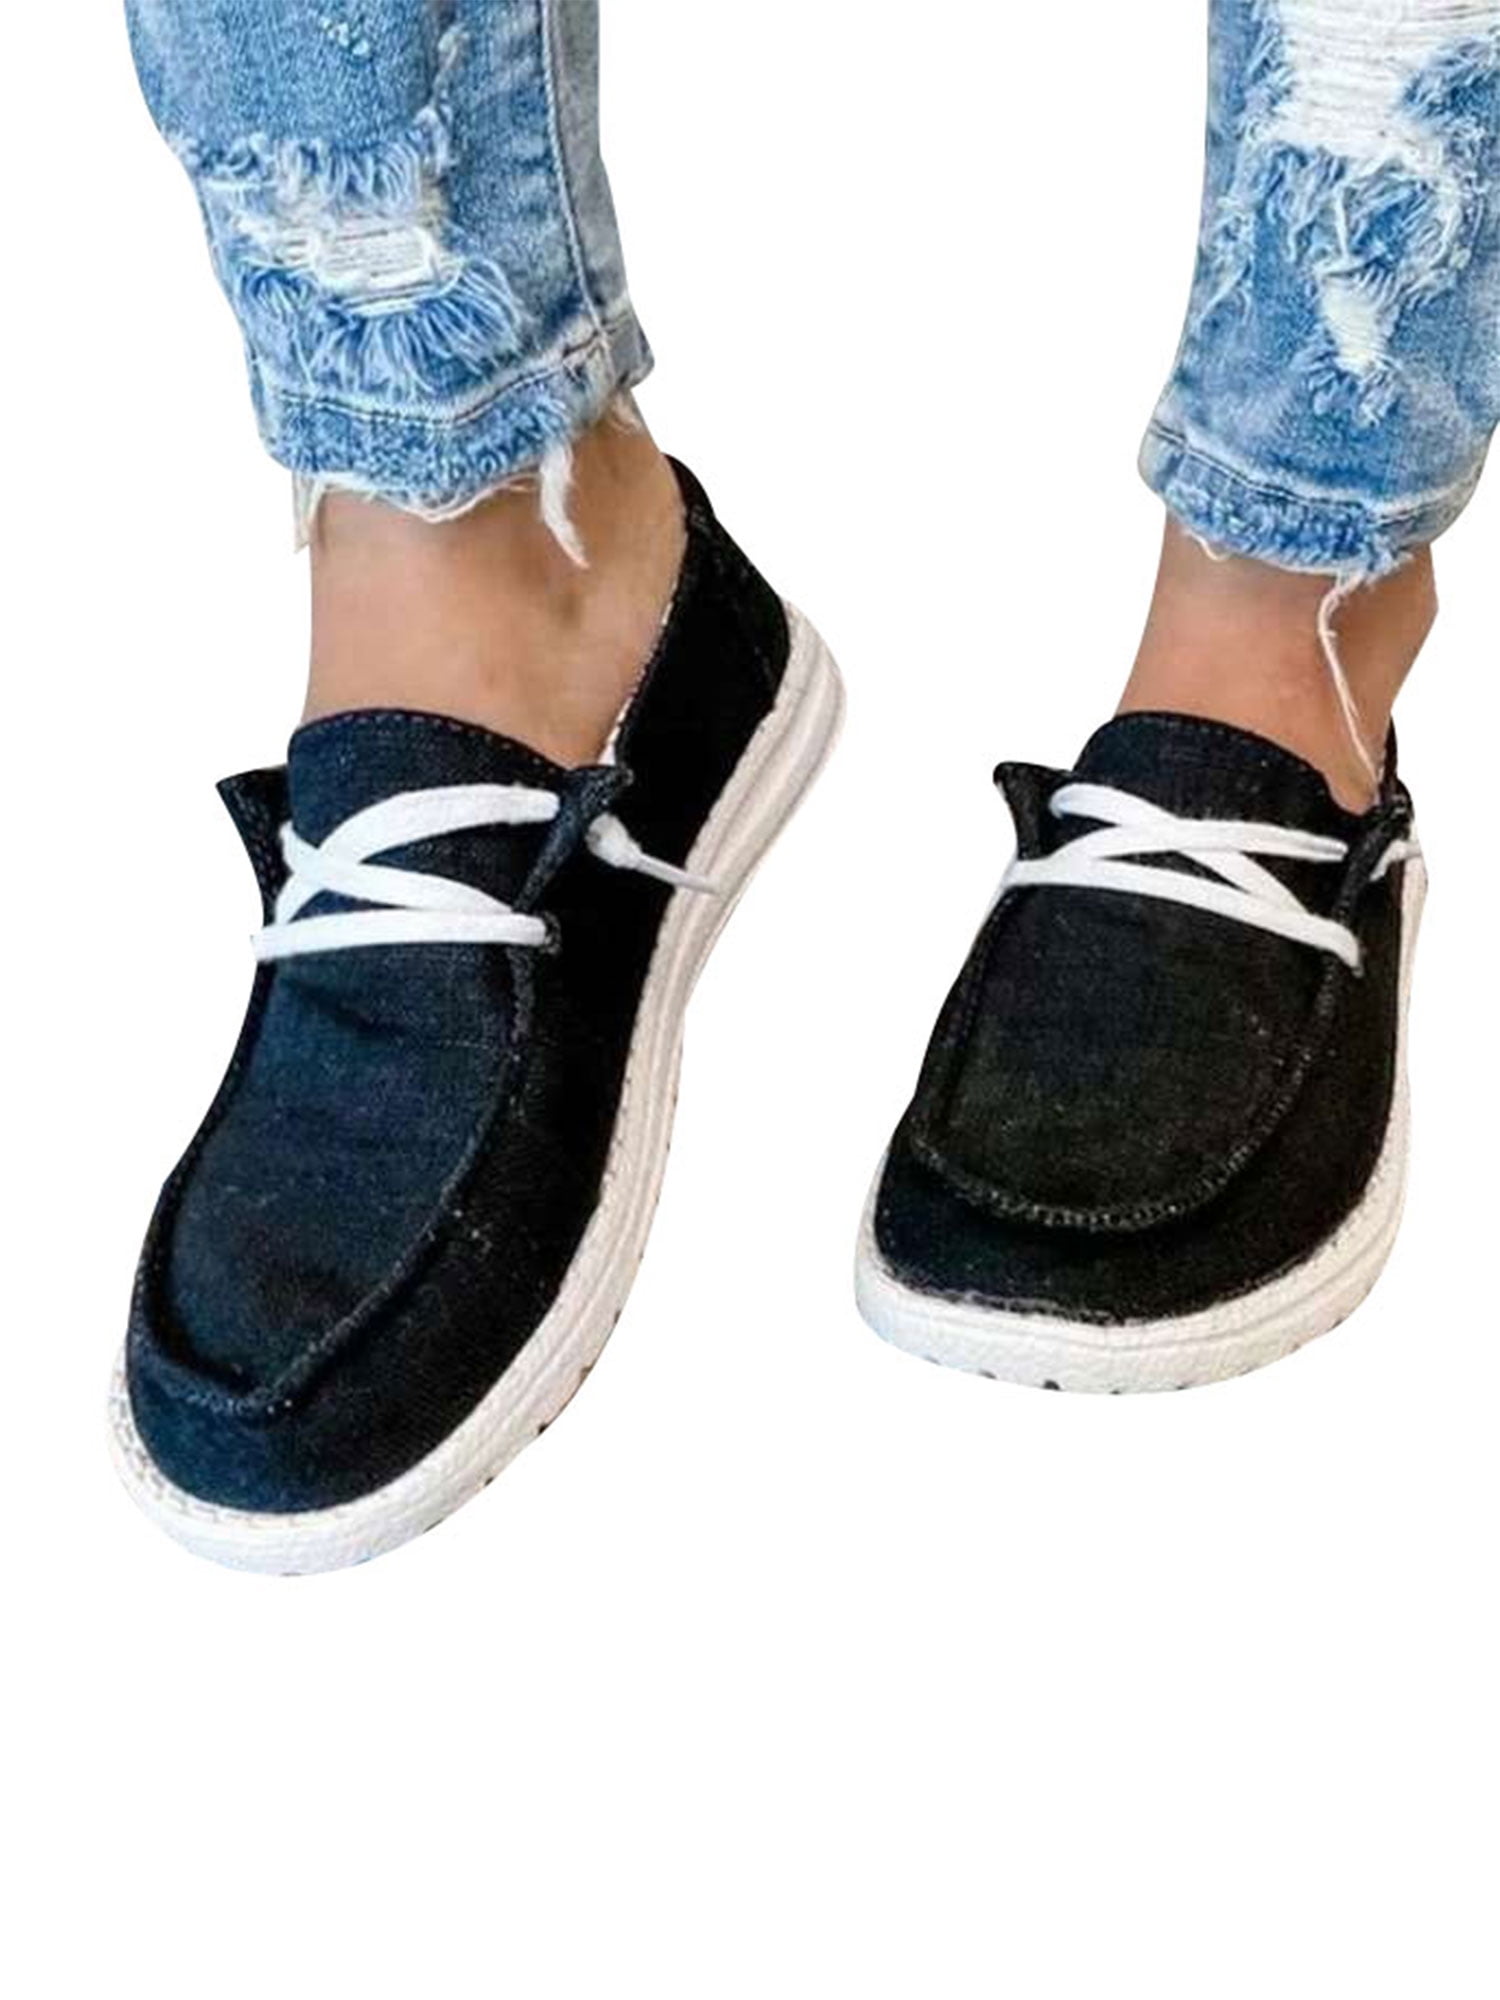 Womens Canvas Low Top Sneaker Lace-up Retro Casual Shoes